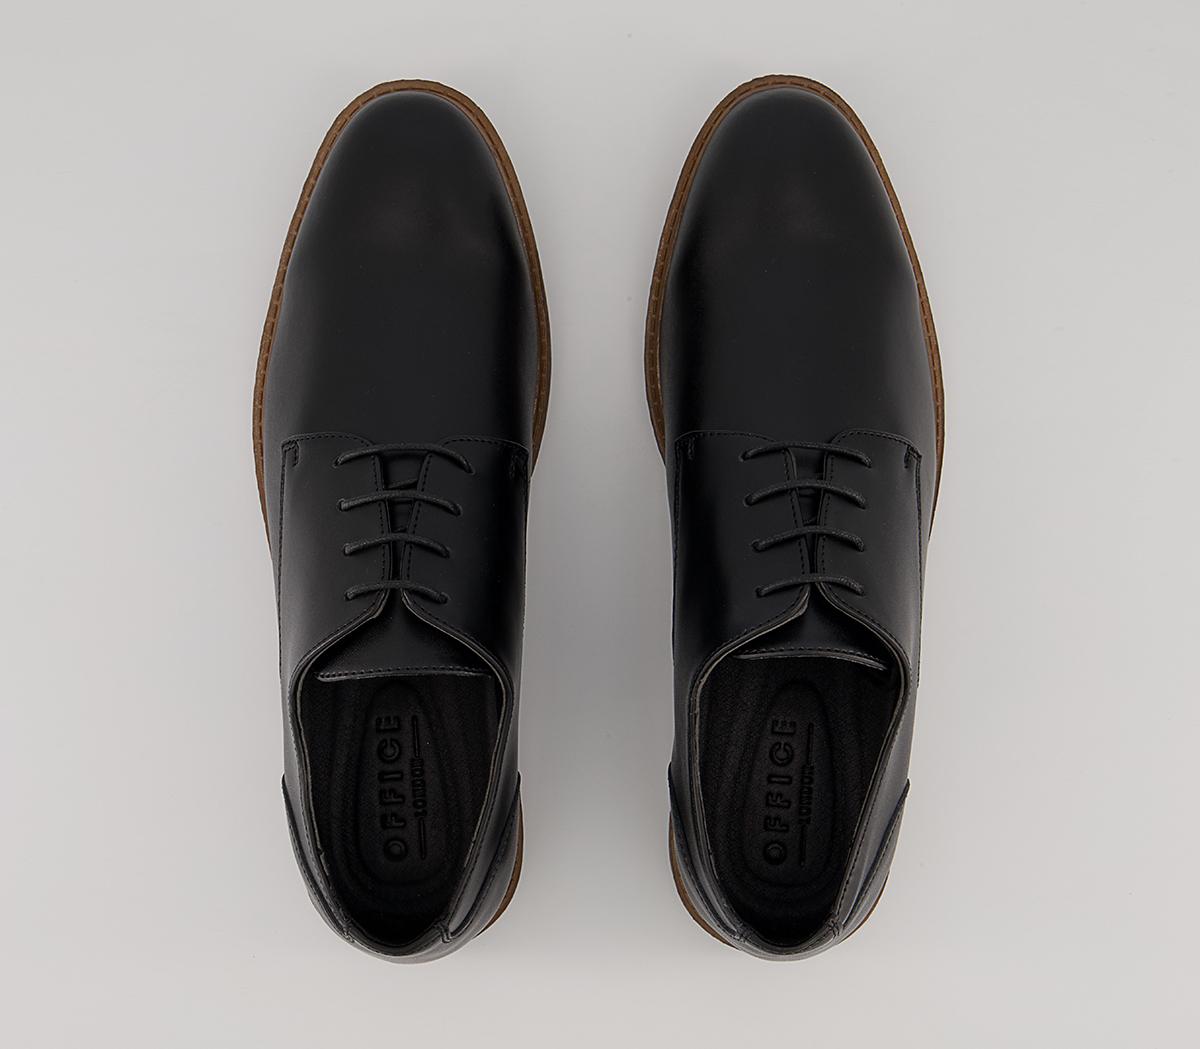 OFFICE Curton Smart Casual Derby Shoes Black Leather - Men's Casual Shoes